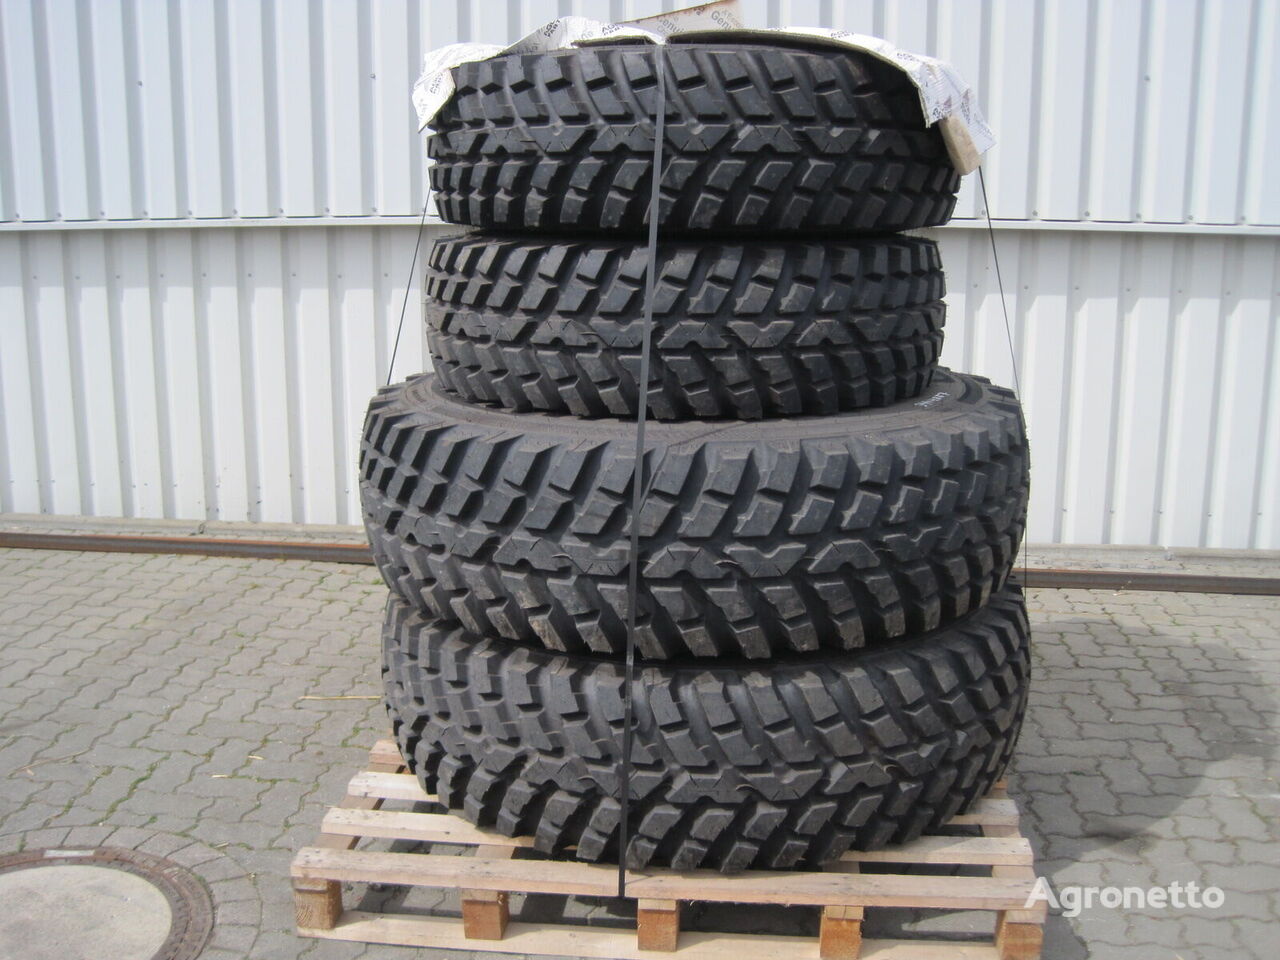 Nokian 360/80R24 tractor tire